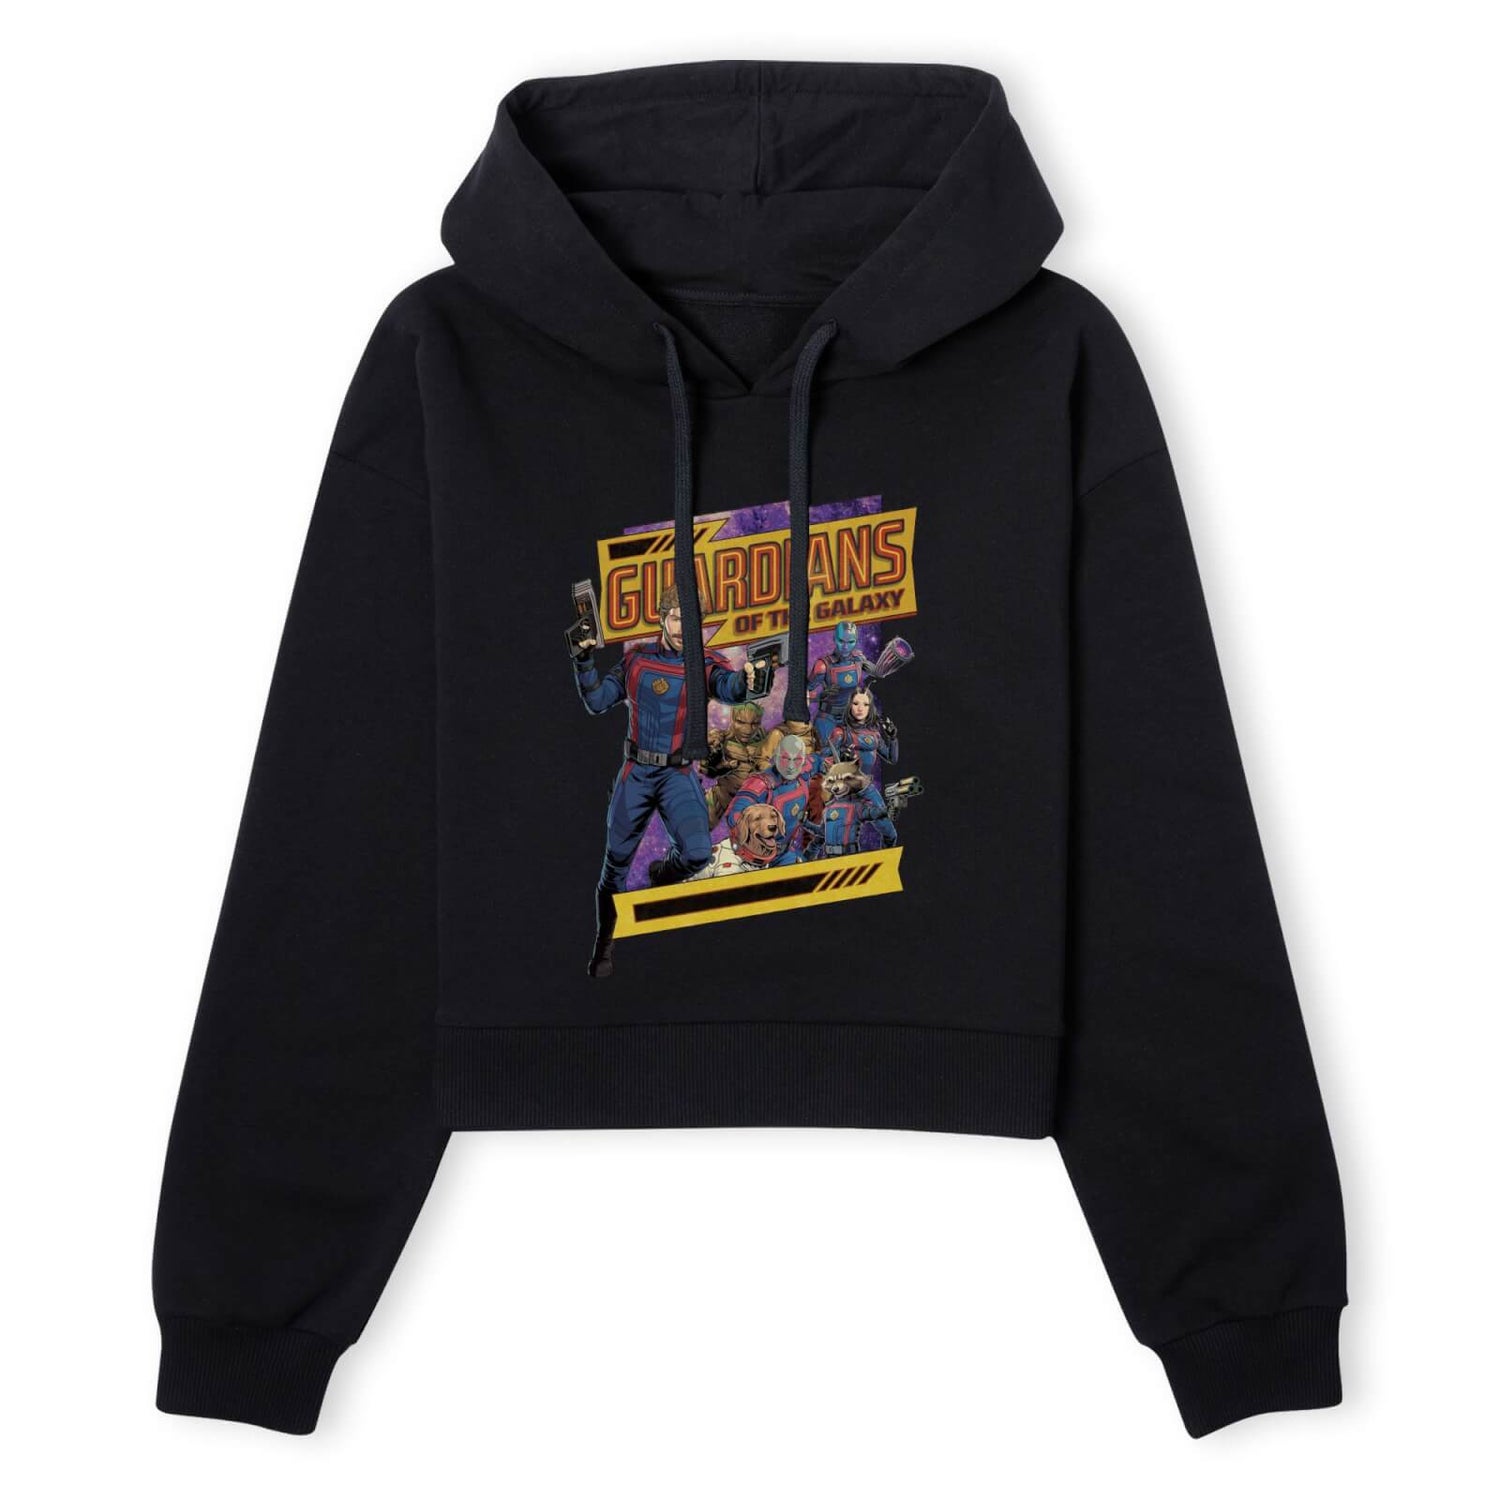 Guardians of the Galaxy Galaxy Women's Cropped Hoodie - Black